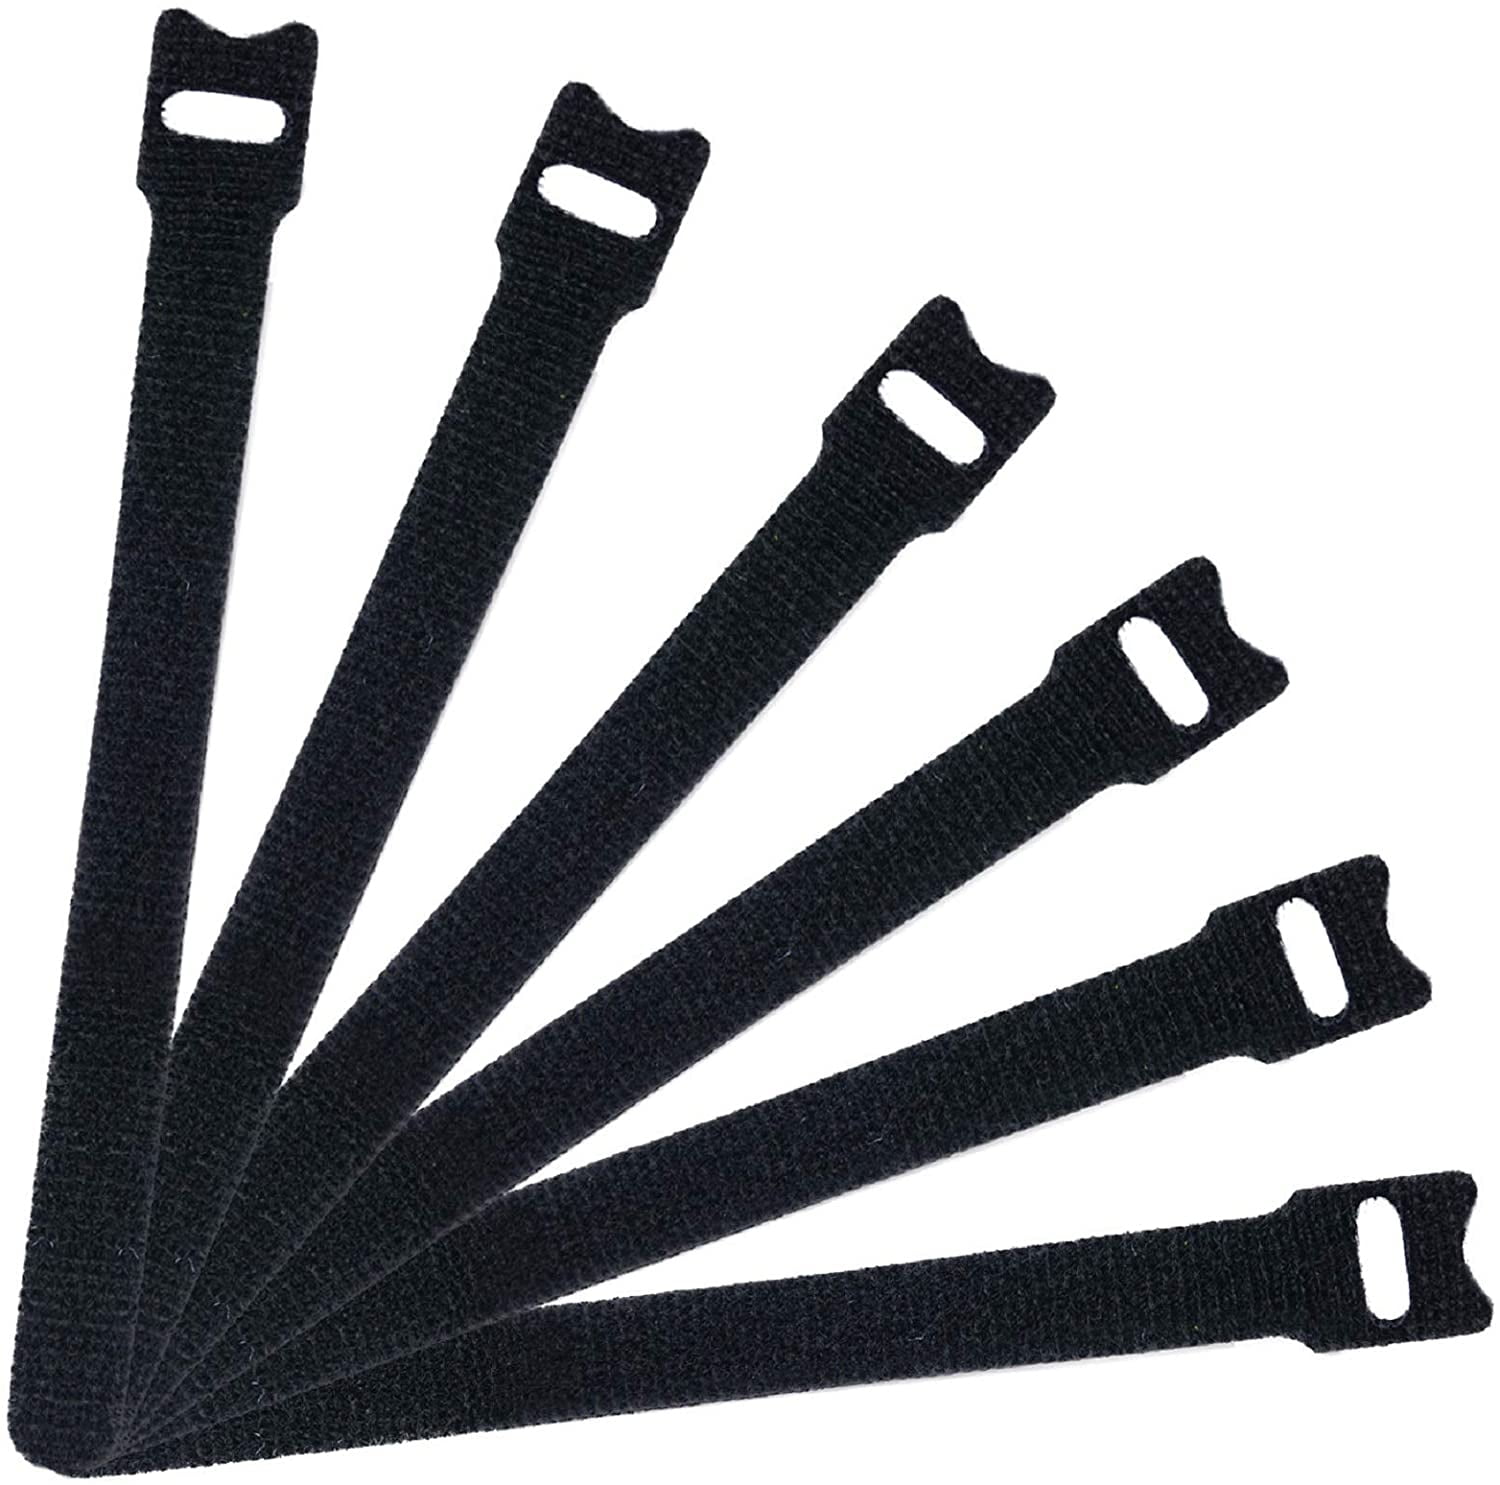 2x 100 6" 6 inch Black Hook and Loop Cable Ties Fastening Tape 200 pcs 